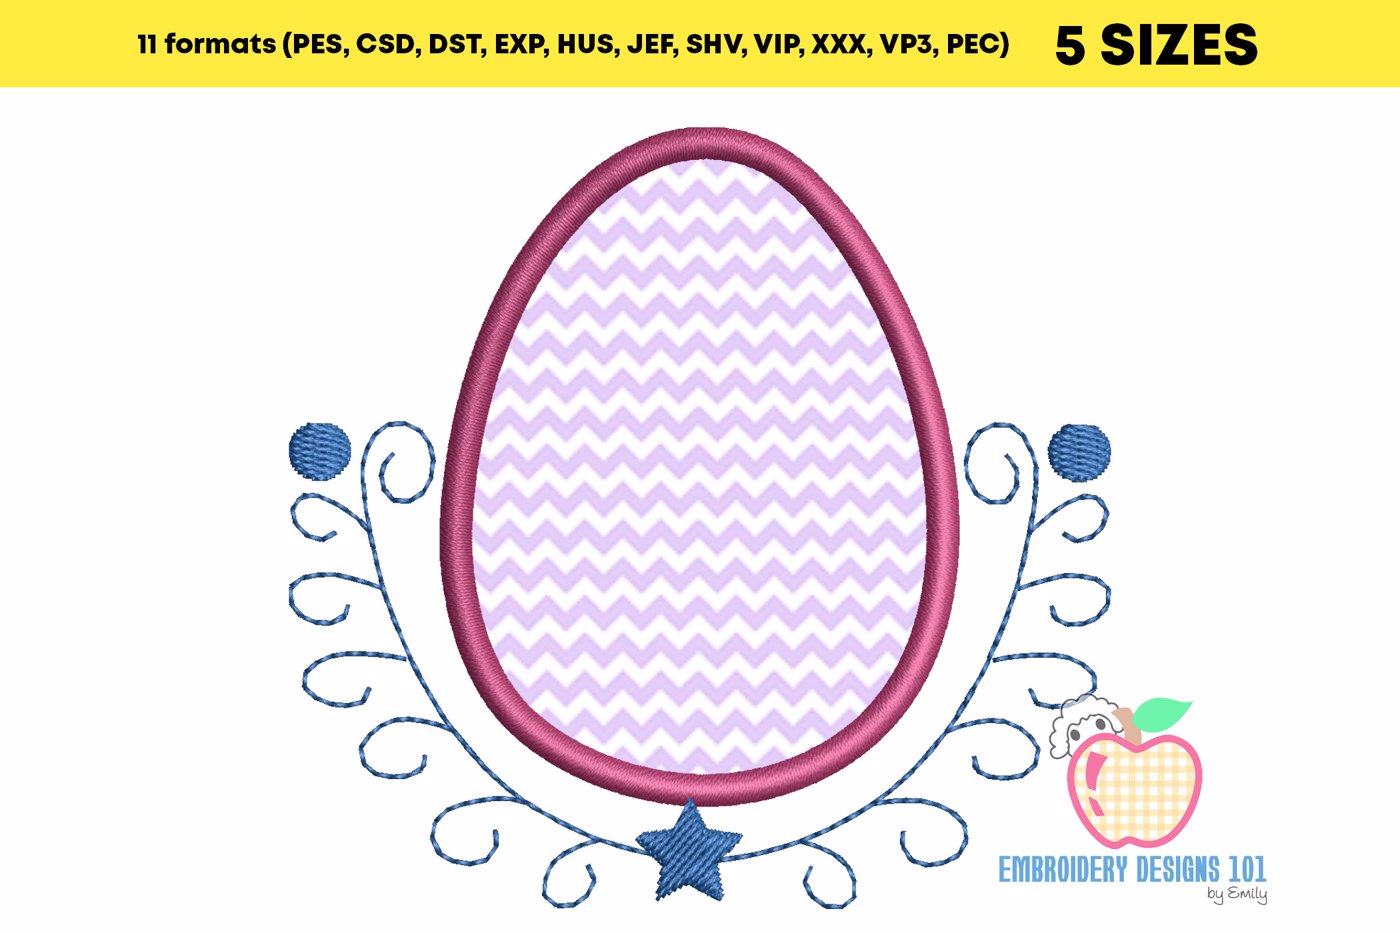 The Easter Egg With Designs Applique